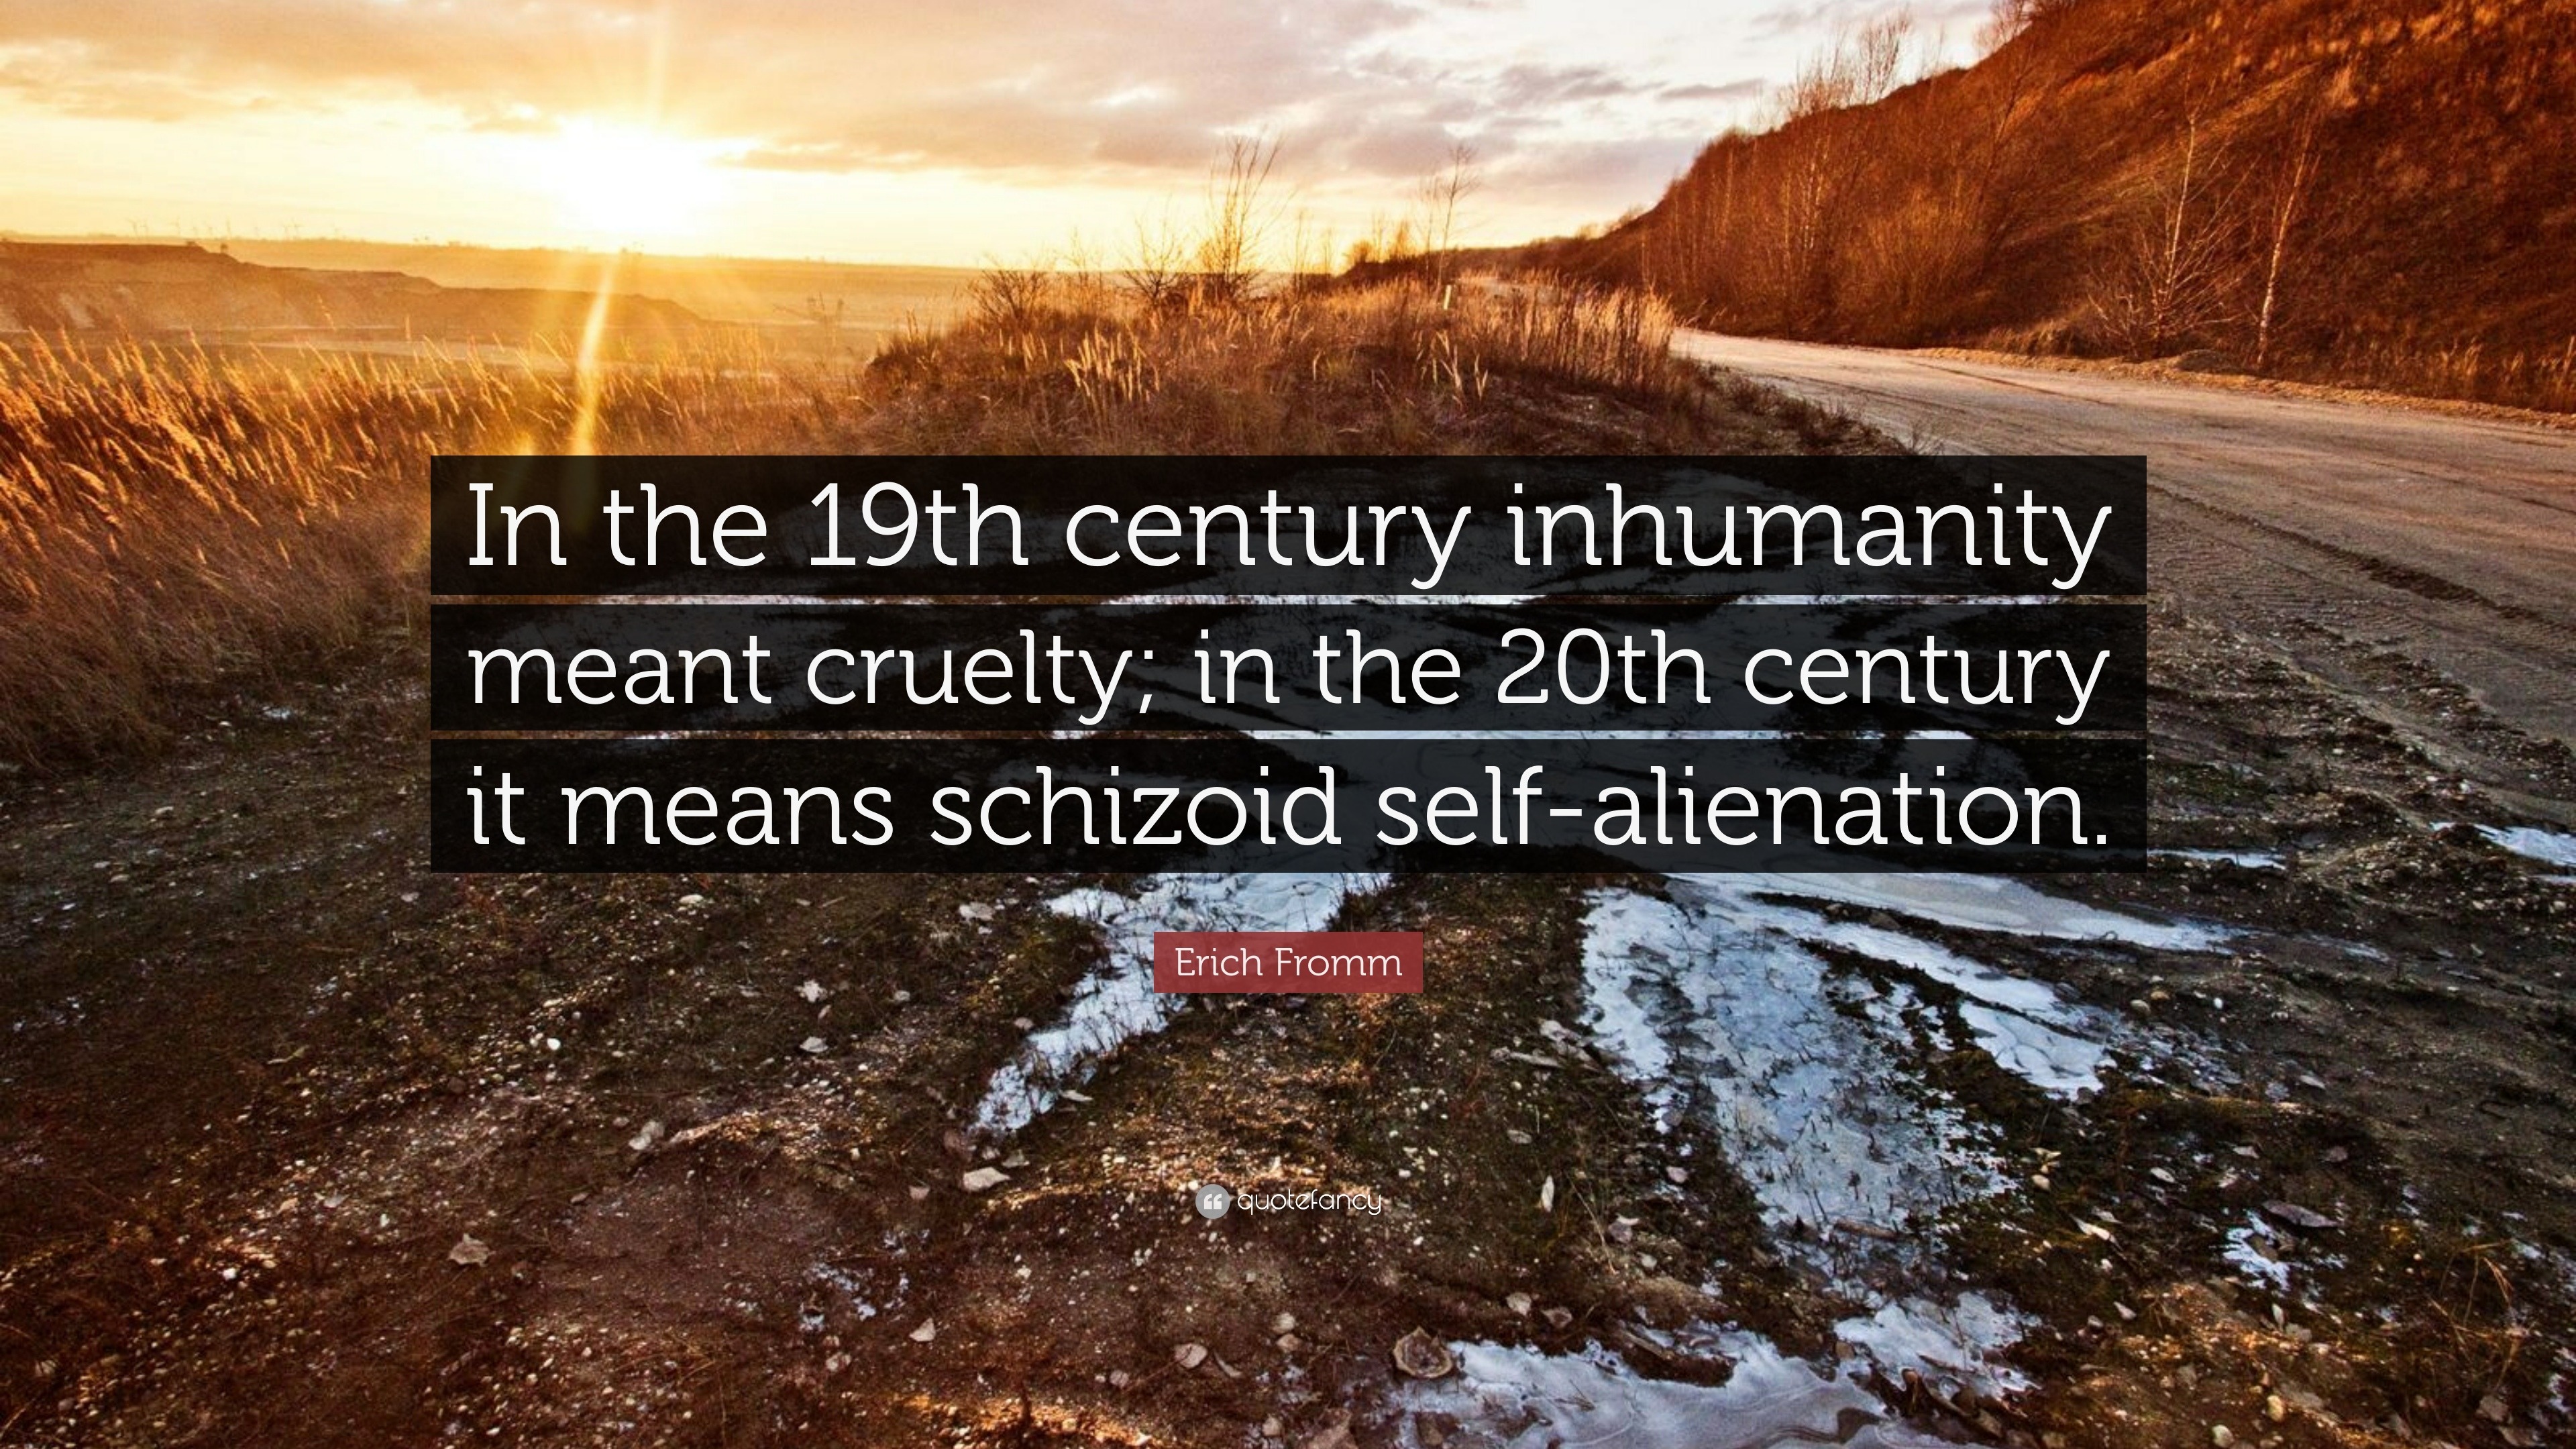 Erich Fromm Quote “In the 19th century inhumanity meant cruelty; in